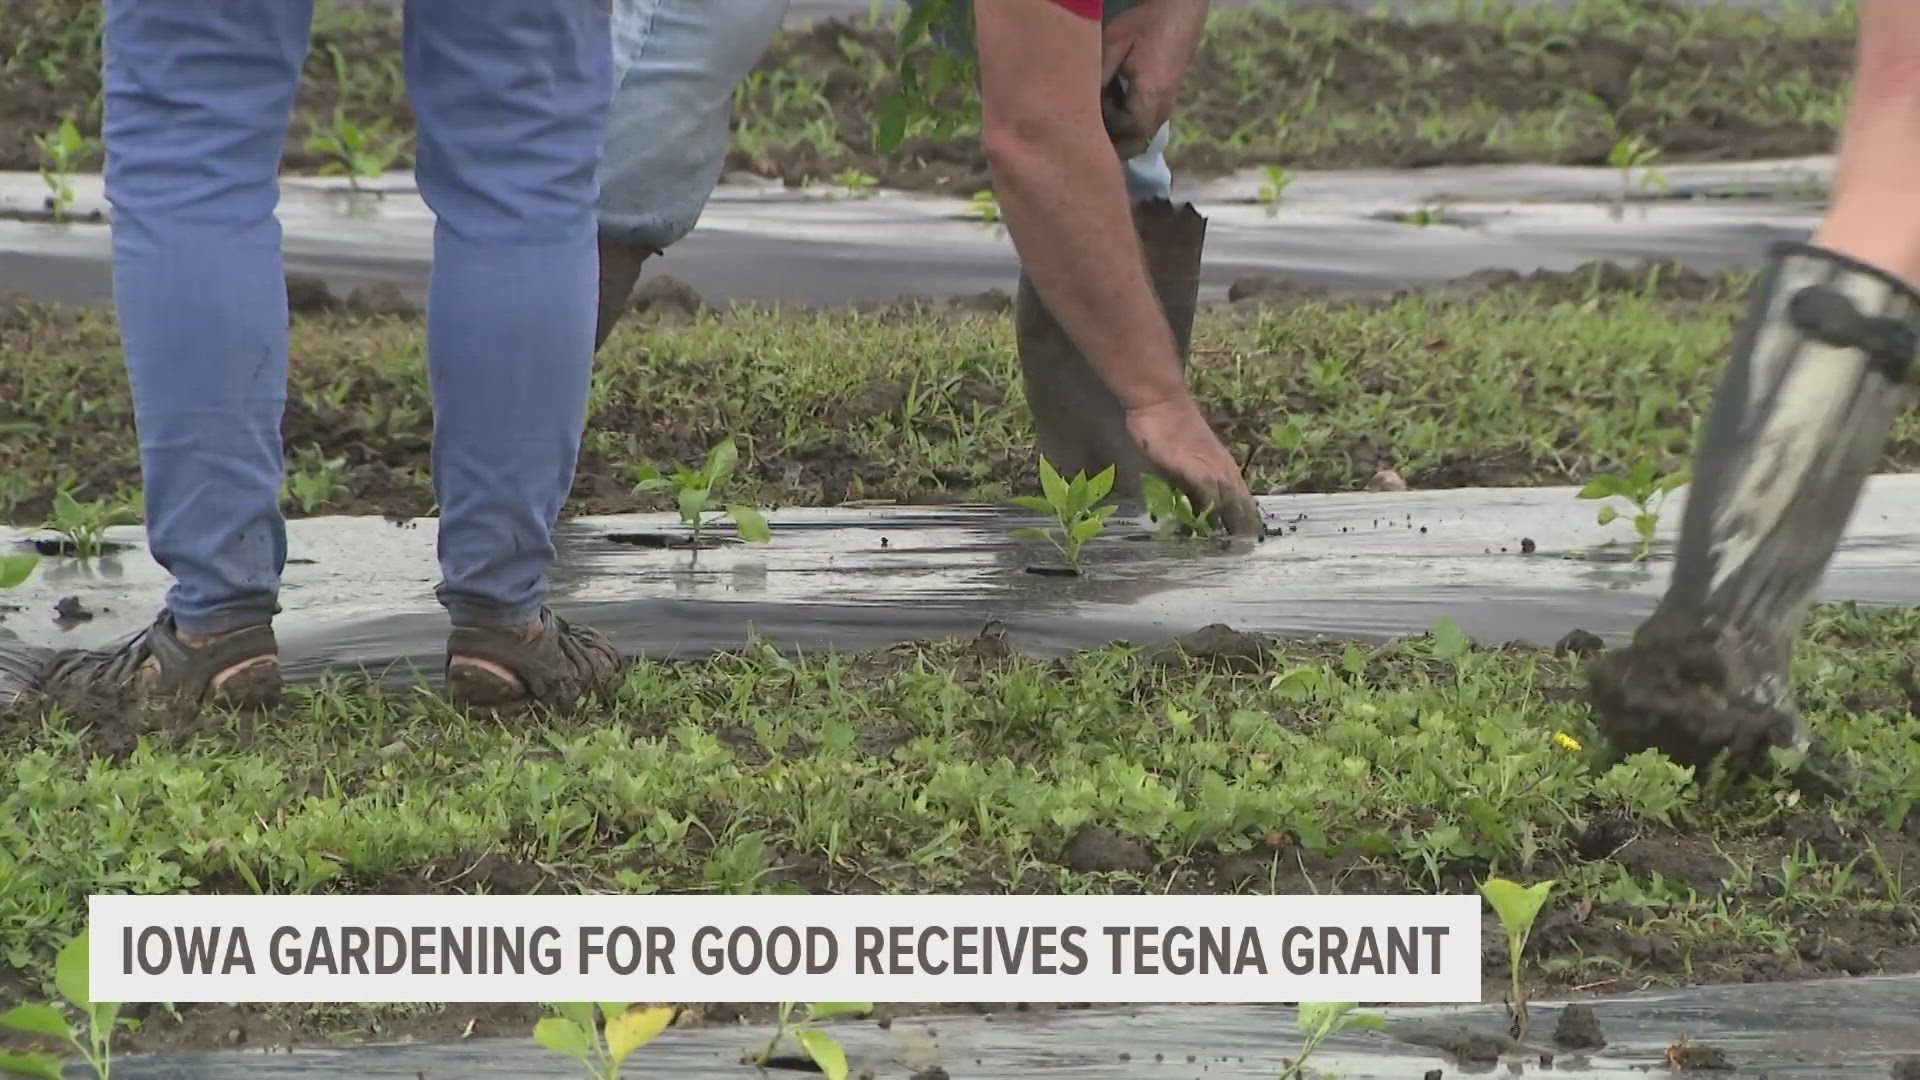 The organization focuses on producing fresh vegetables that can be distributed to local food pantries and other projects to feed those in need.